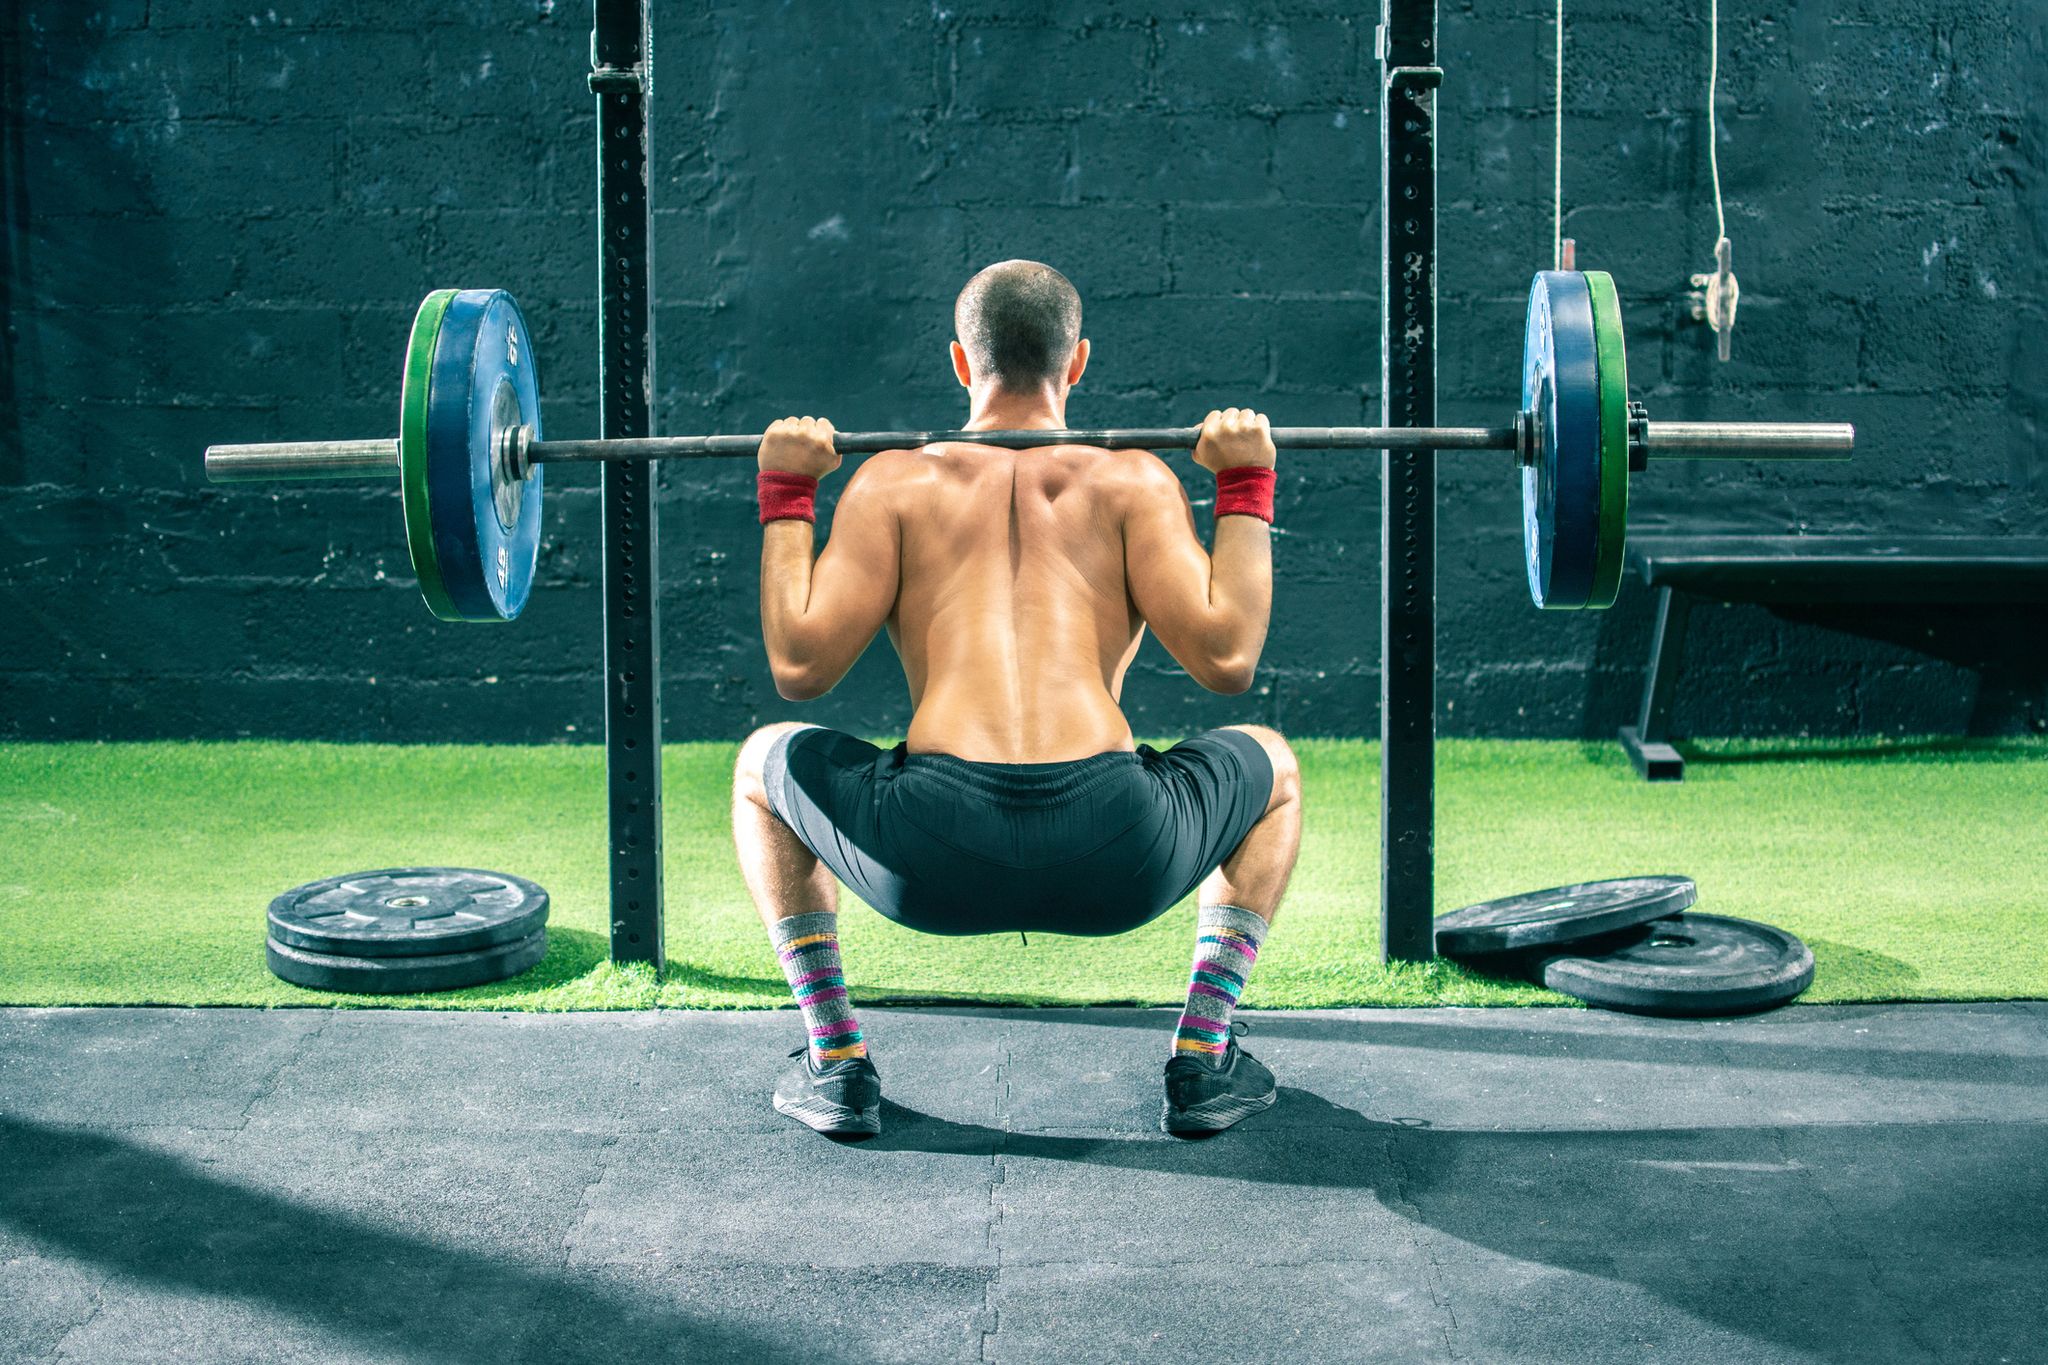 https://hips.hearstapps.com/hmg-prod/images/back-view-of-young-sportsman-lifting-a-barbell-at-royalty-free-image-1620051514.?resize=2048:*